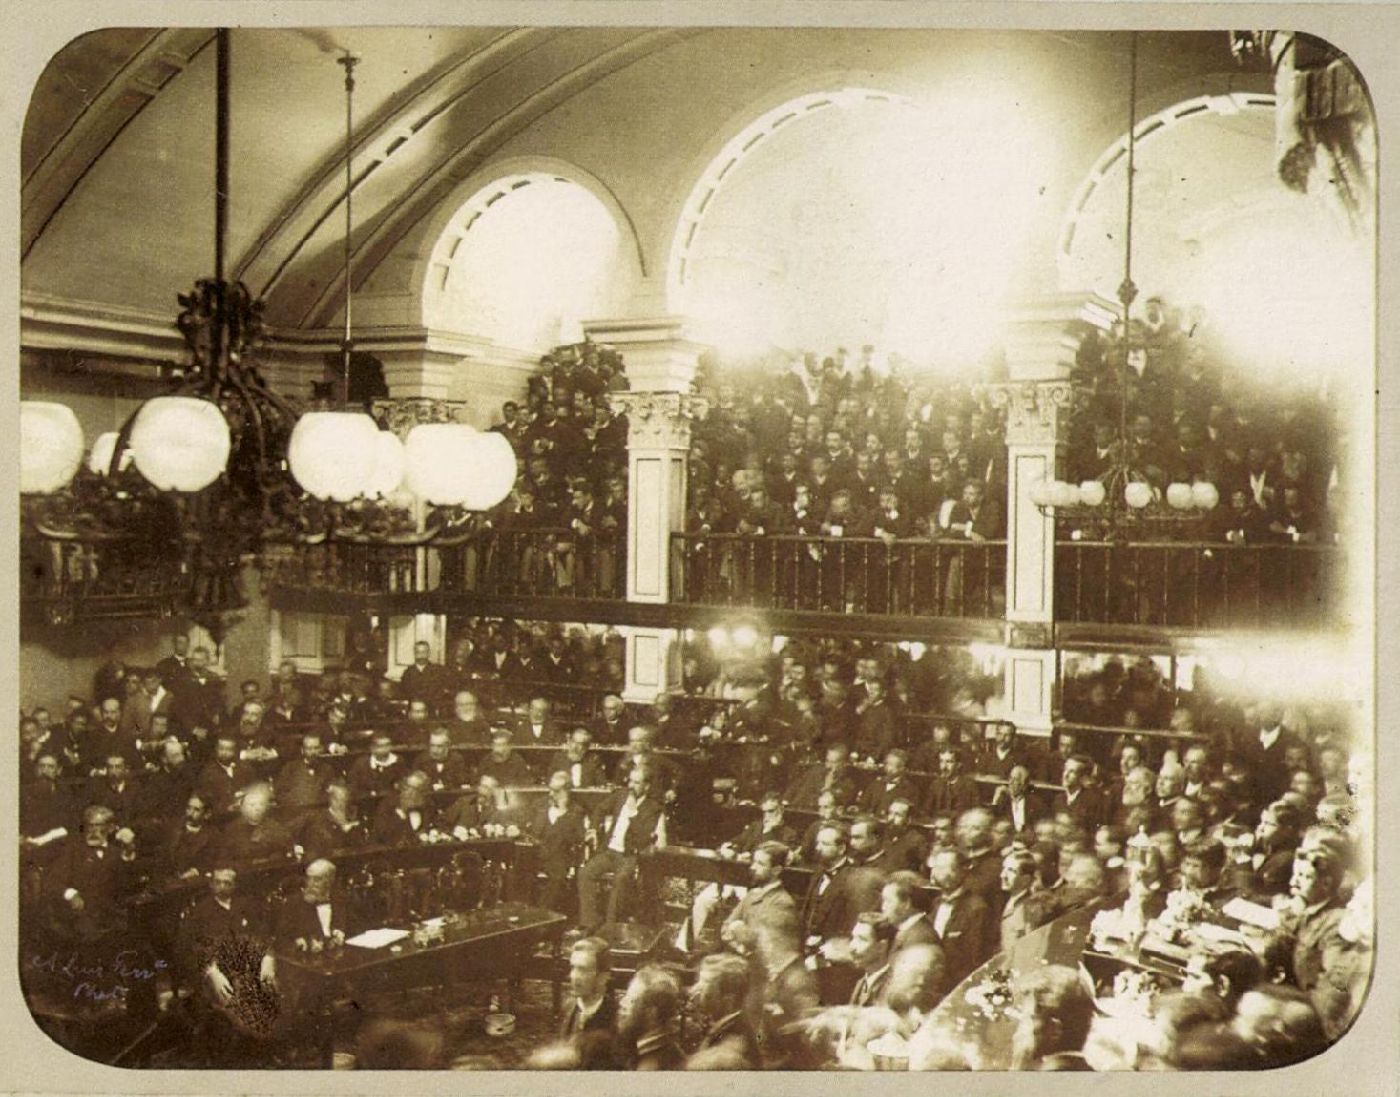 The Brazilian Senate passing the bill that abolished slavery in the country, 1888.